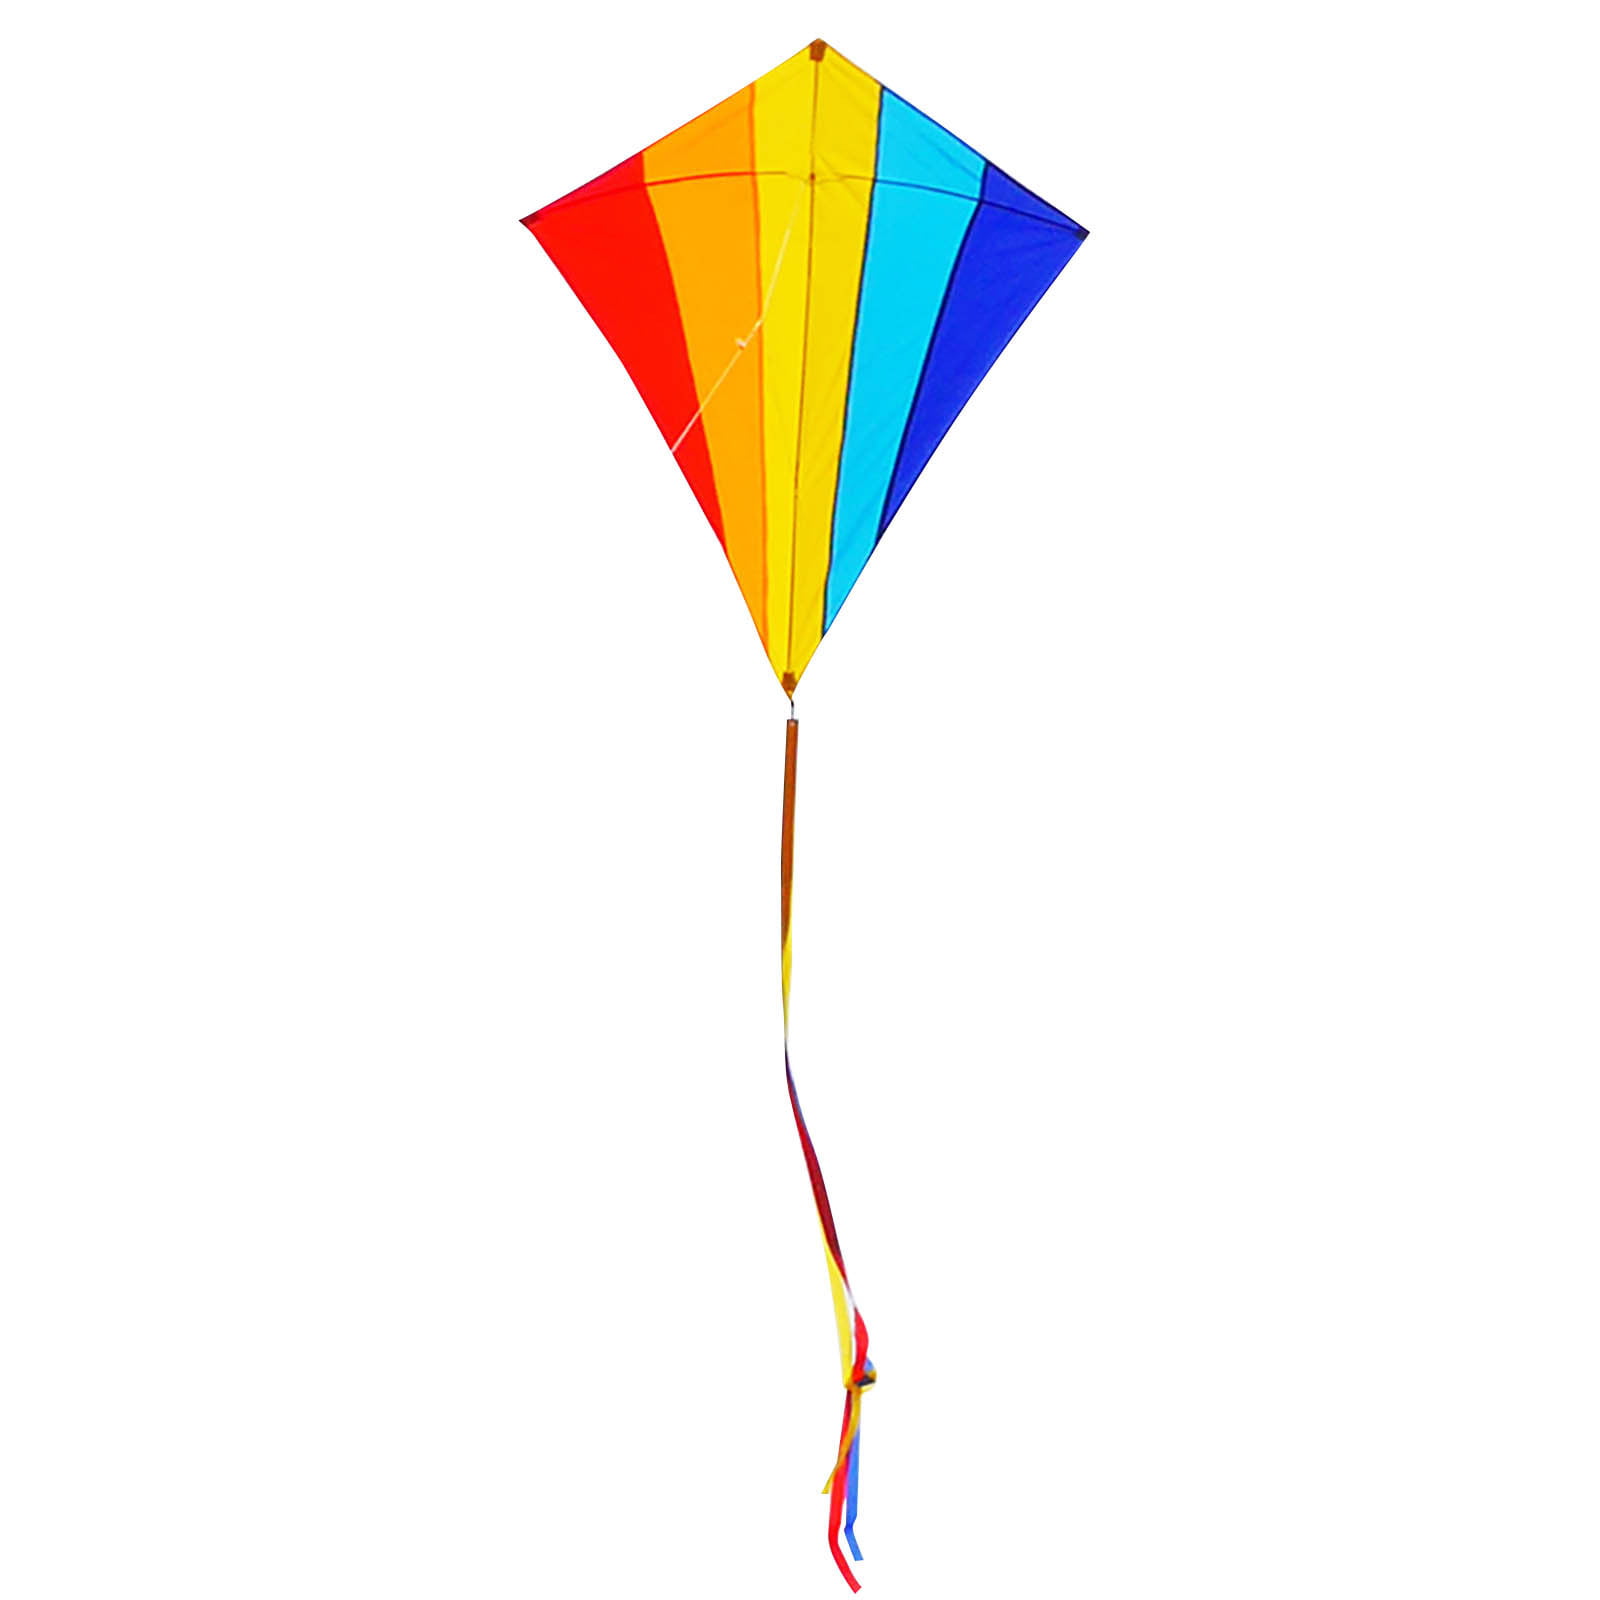 Backyard and Outdoor Ac Parks Including Reel and Bag Wide Colorful Kite Rainbow Vivid Colors for Kids and Adults 60 Inches Wings Single Line Flyer with Long Tail 95 Inches Perfect Flying Toy for Beach Easy to Assemble and Fly in Seconds to Catch Wind